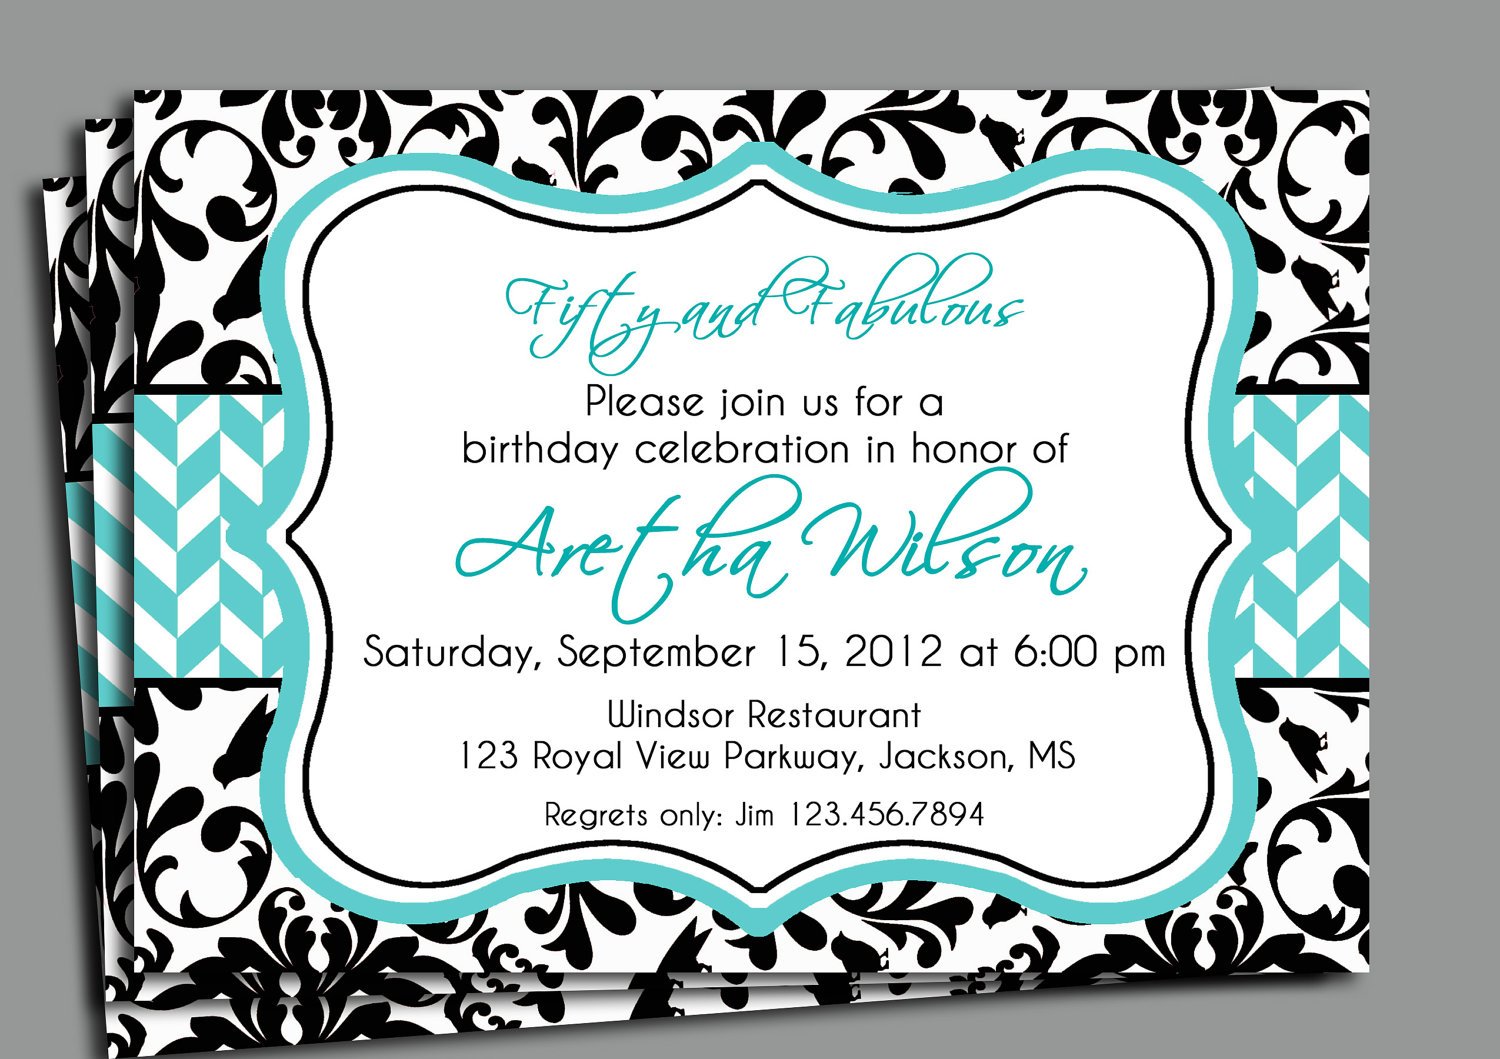 1000+ Images About Bridal Shower Invitations On Pinterest